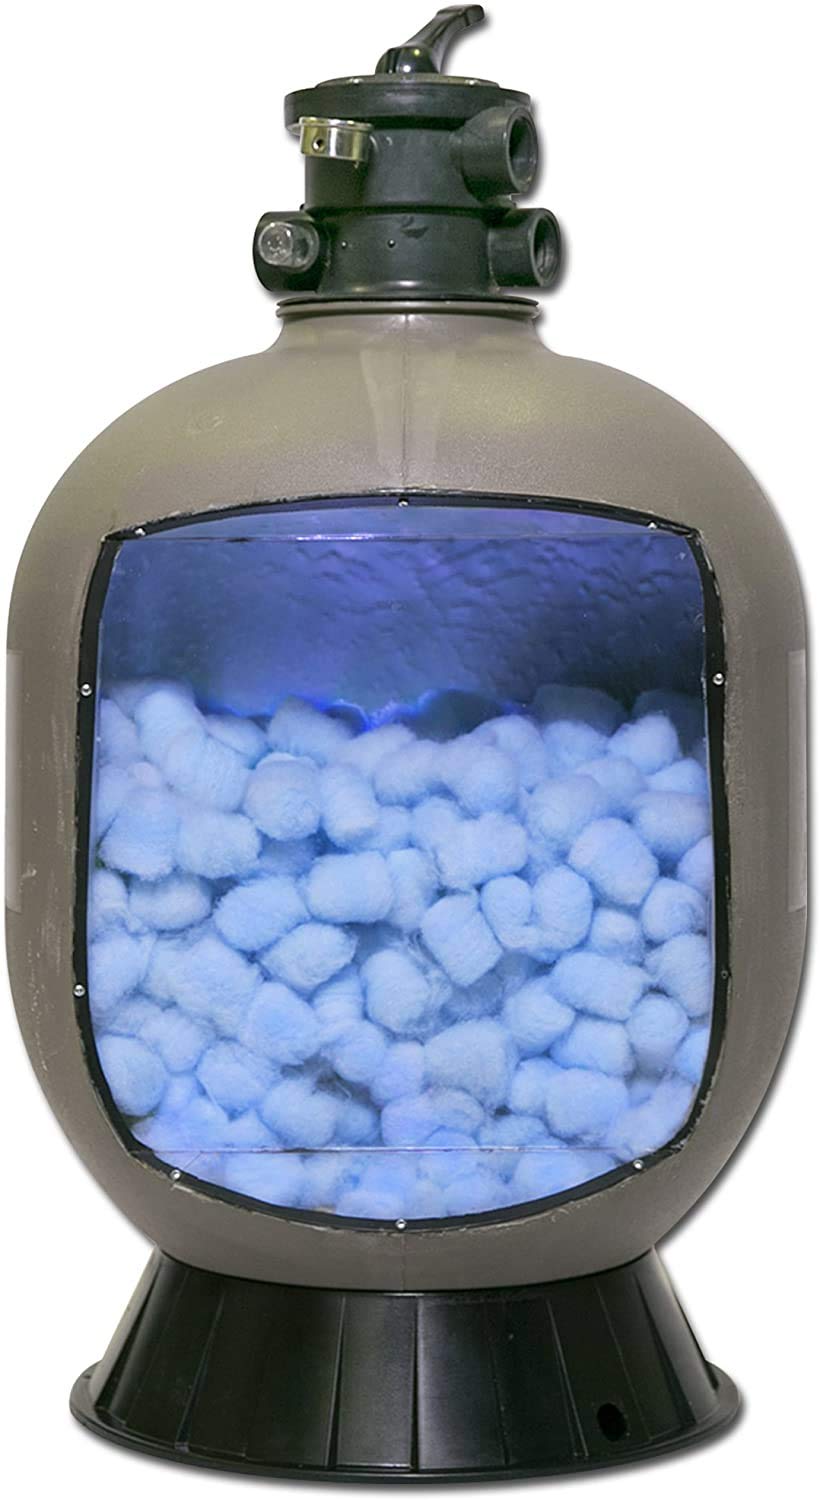 FilterBalls Blu (Single Pack) - Replacement Media for Sand Filters - 1 Bag Equals 100lbs of Sand